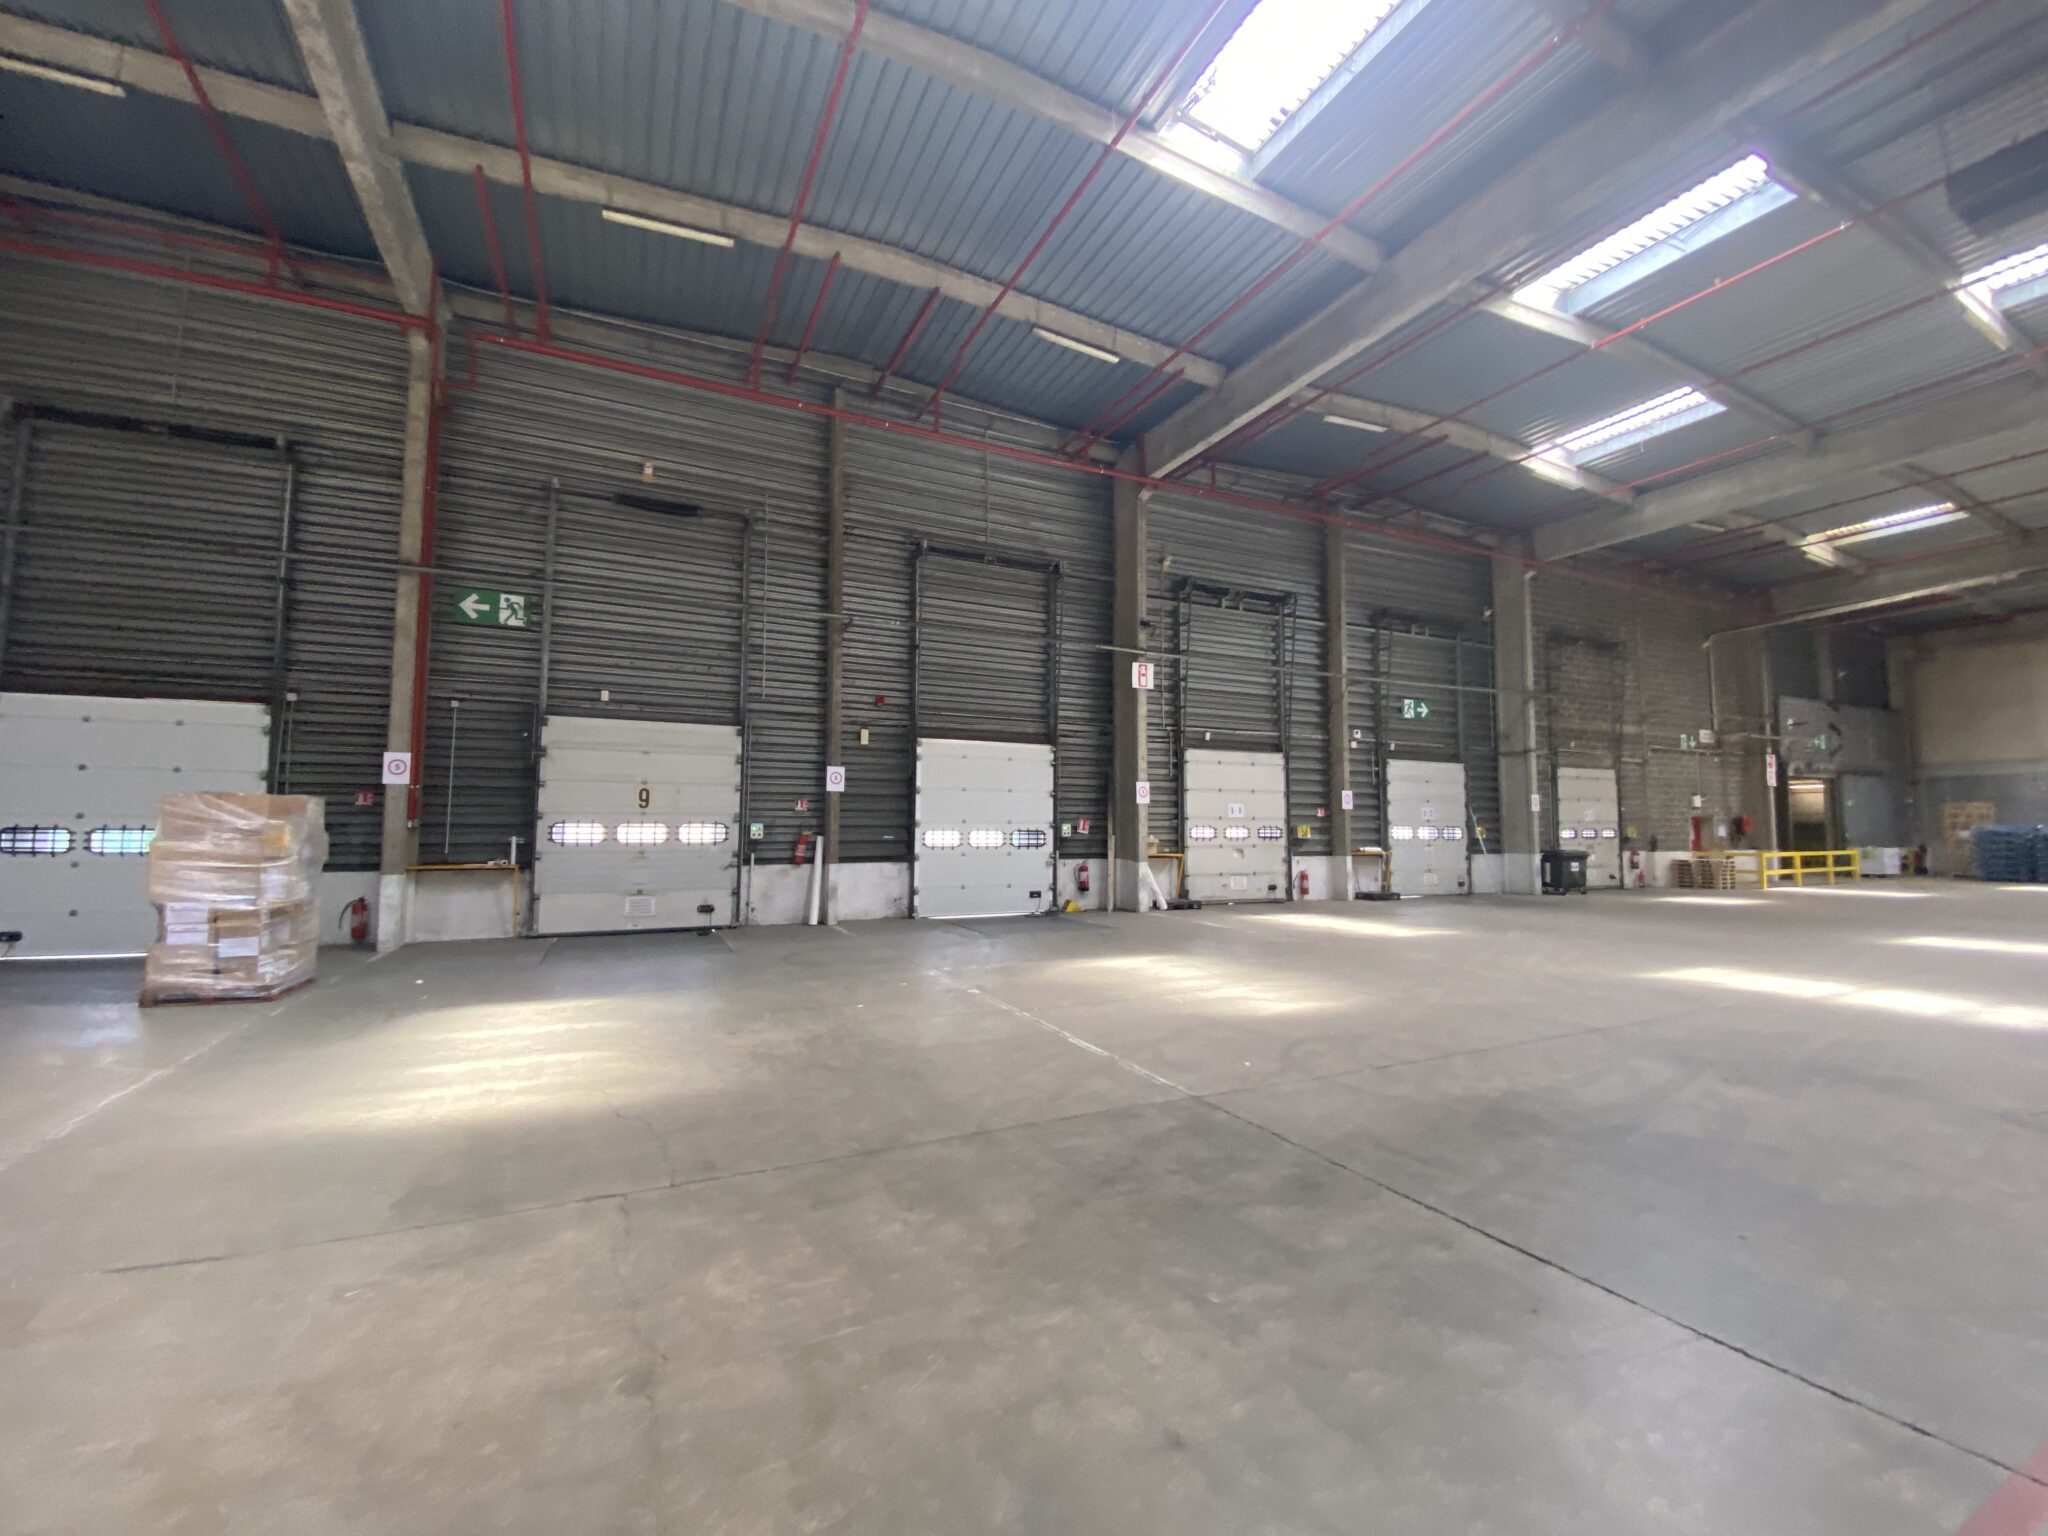 Internal space of GLP Park Henin-Beaumont with multiple closed loading bays